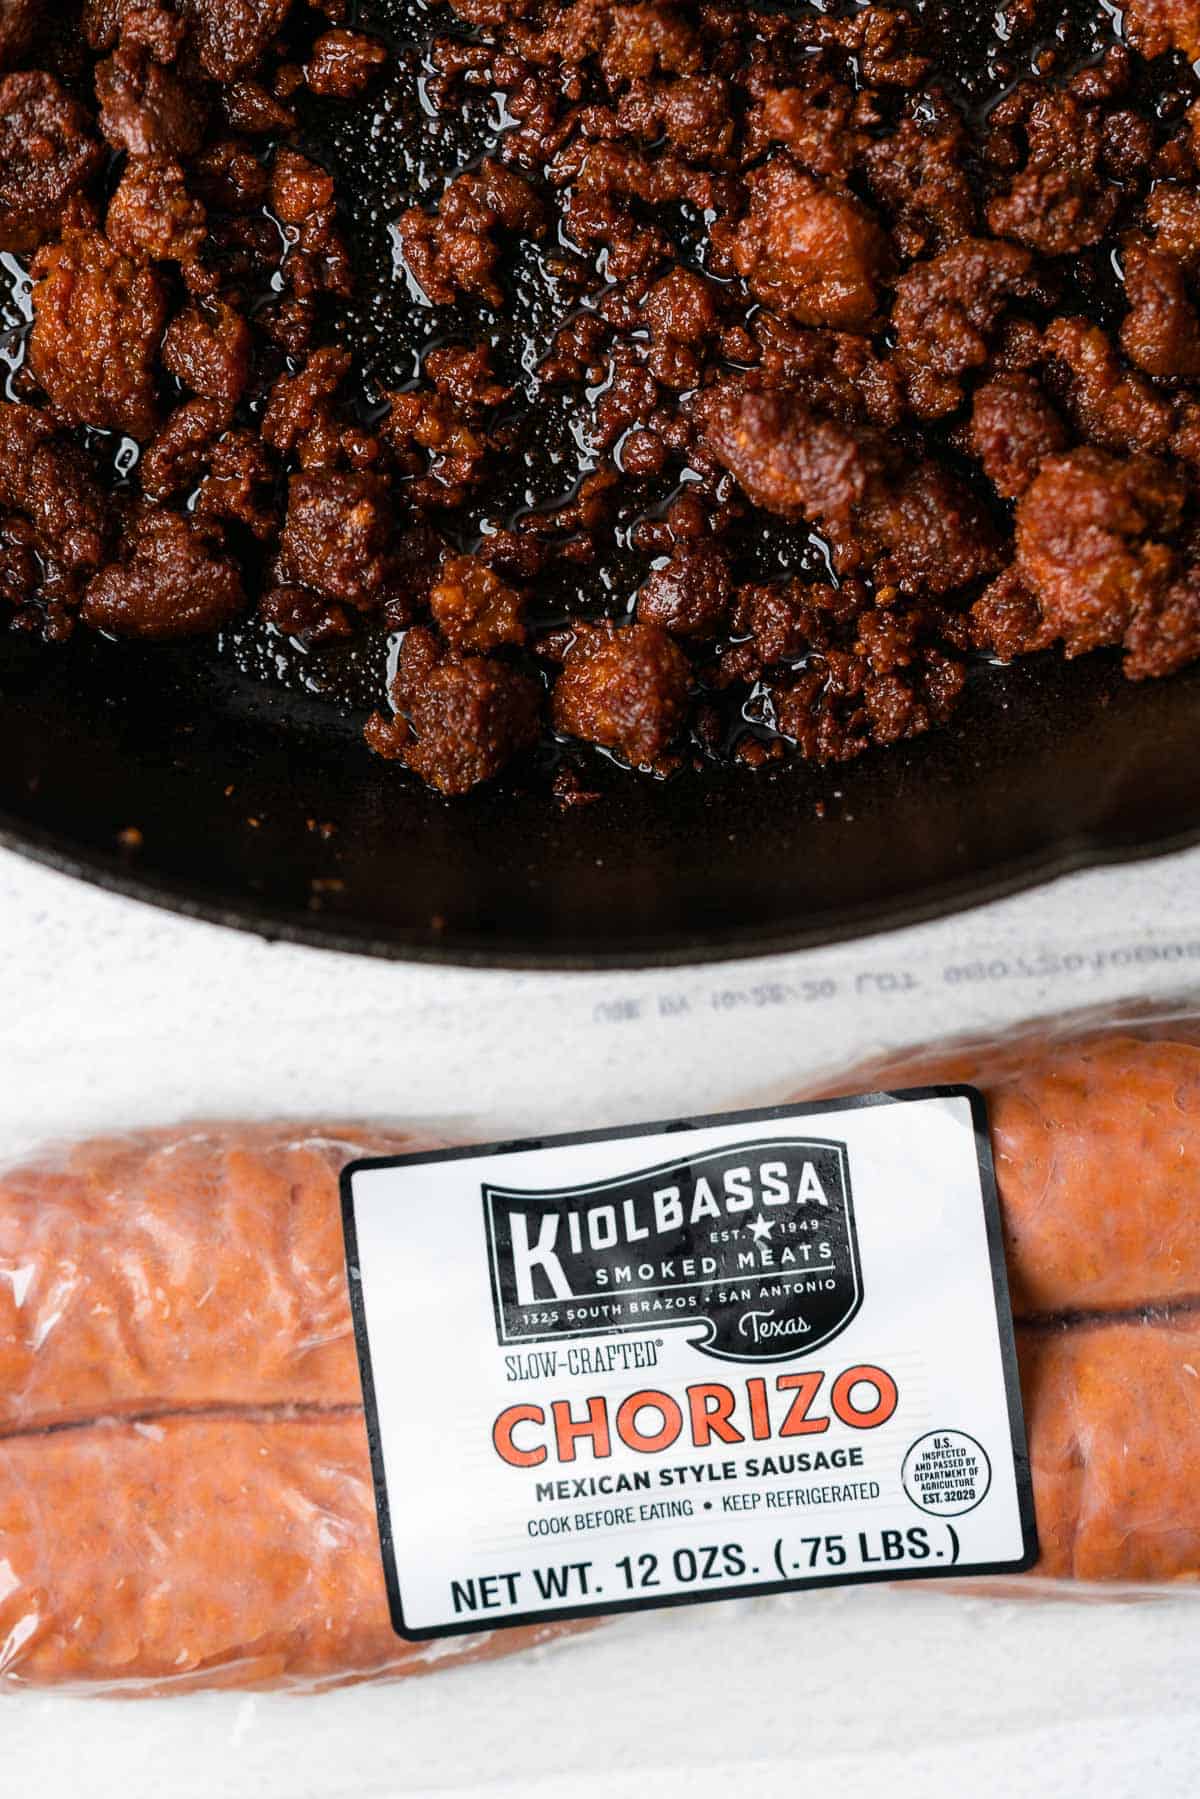 kiolbassa smoked meats chorizo raw in the package and cooked in a cast iron skillet